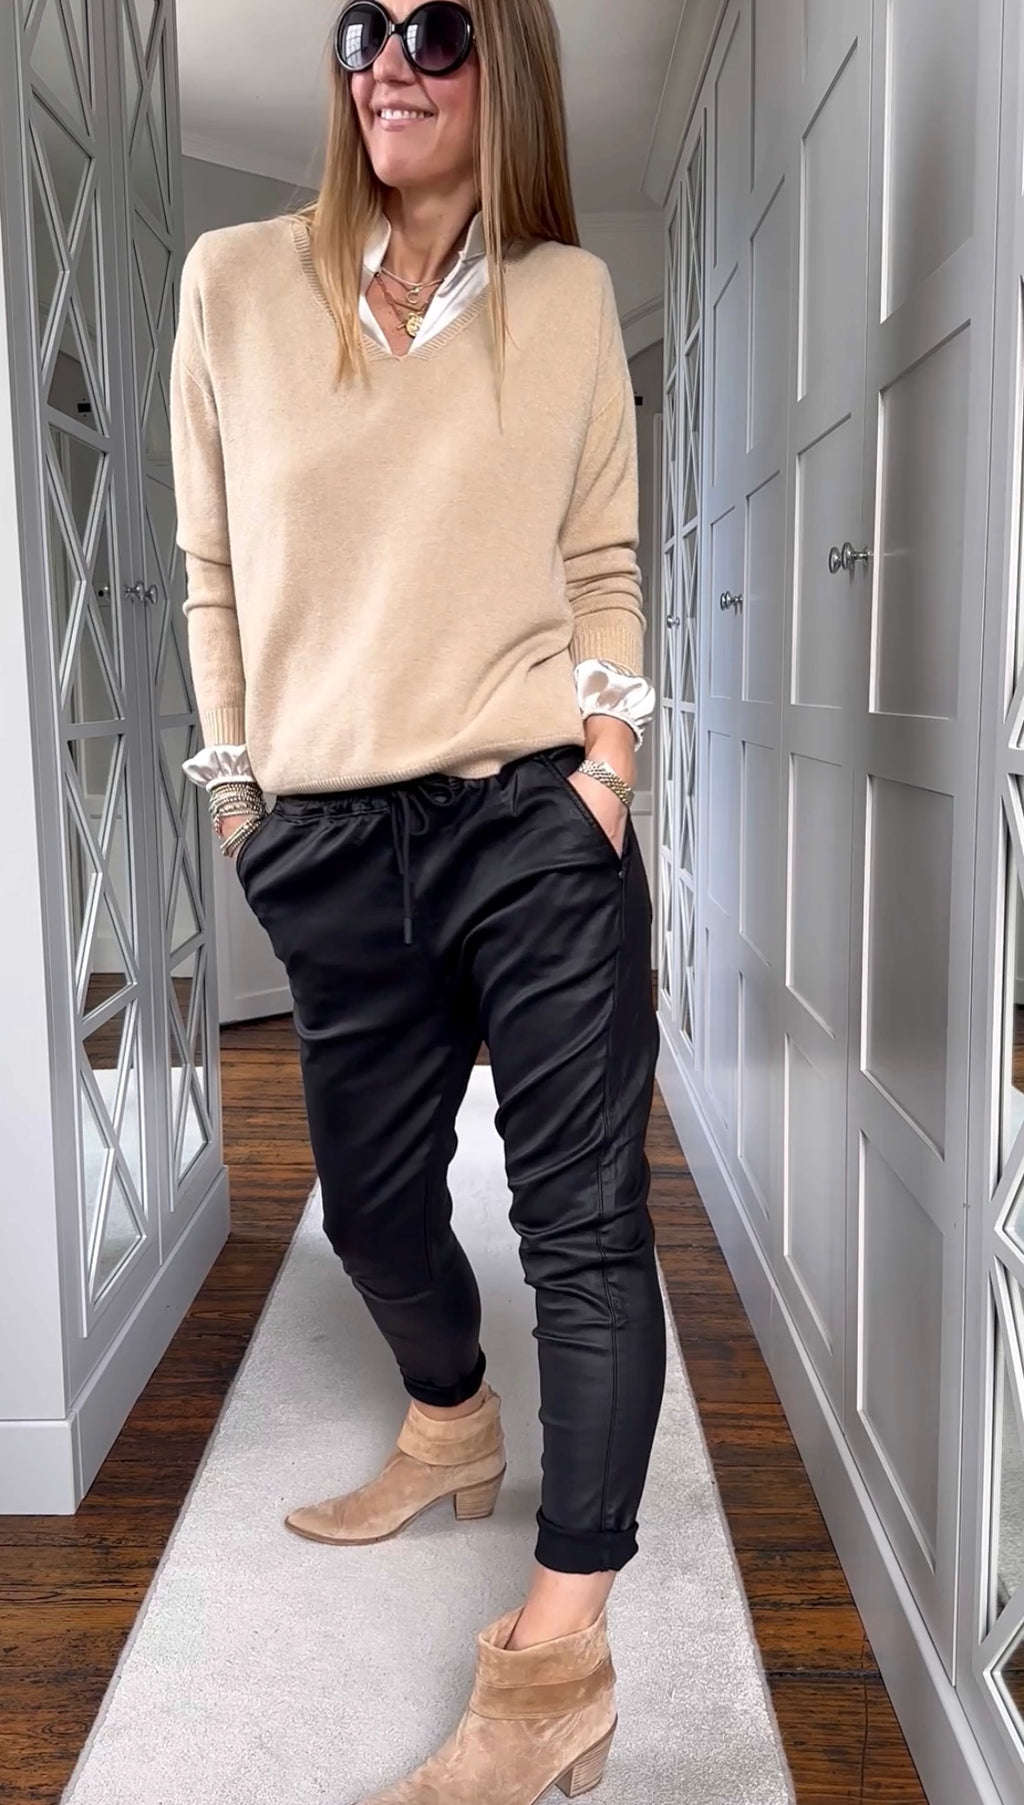 Melly & Co Black Coated Joggers